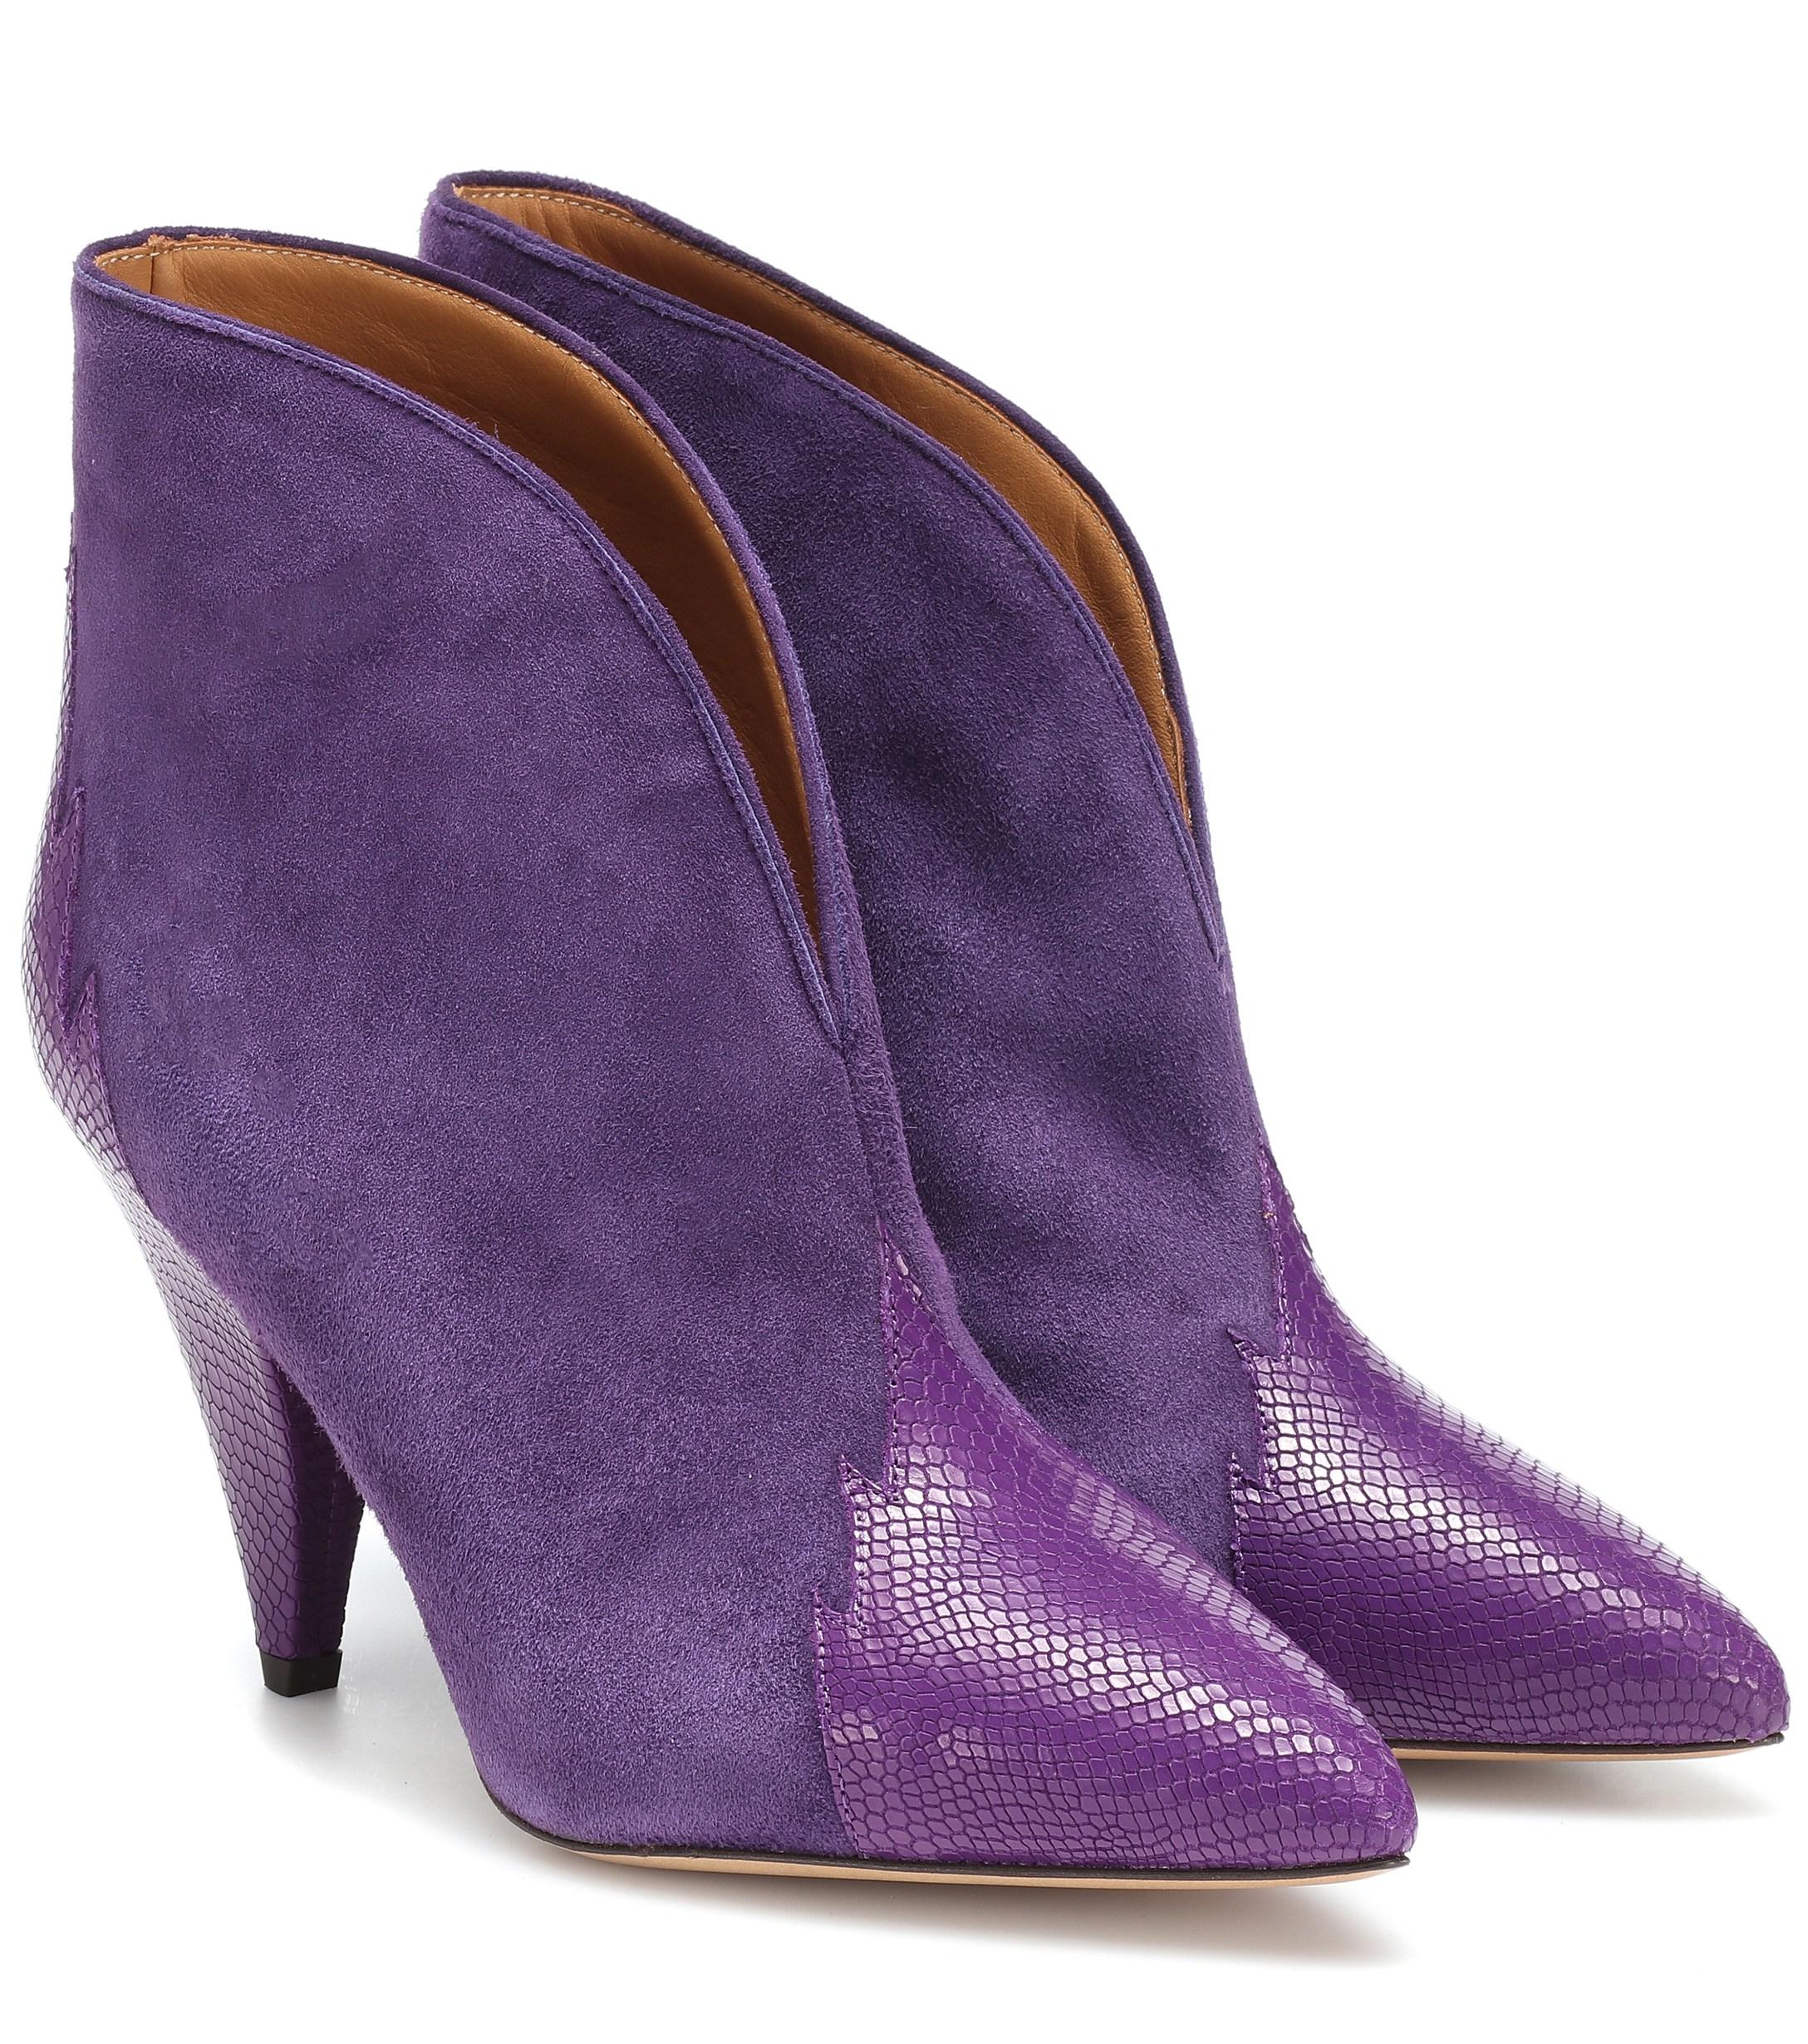 Isabel Marant Archee Suede Ankle Boots in Purple - Save 60% - Lyst